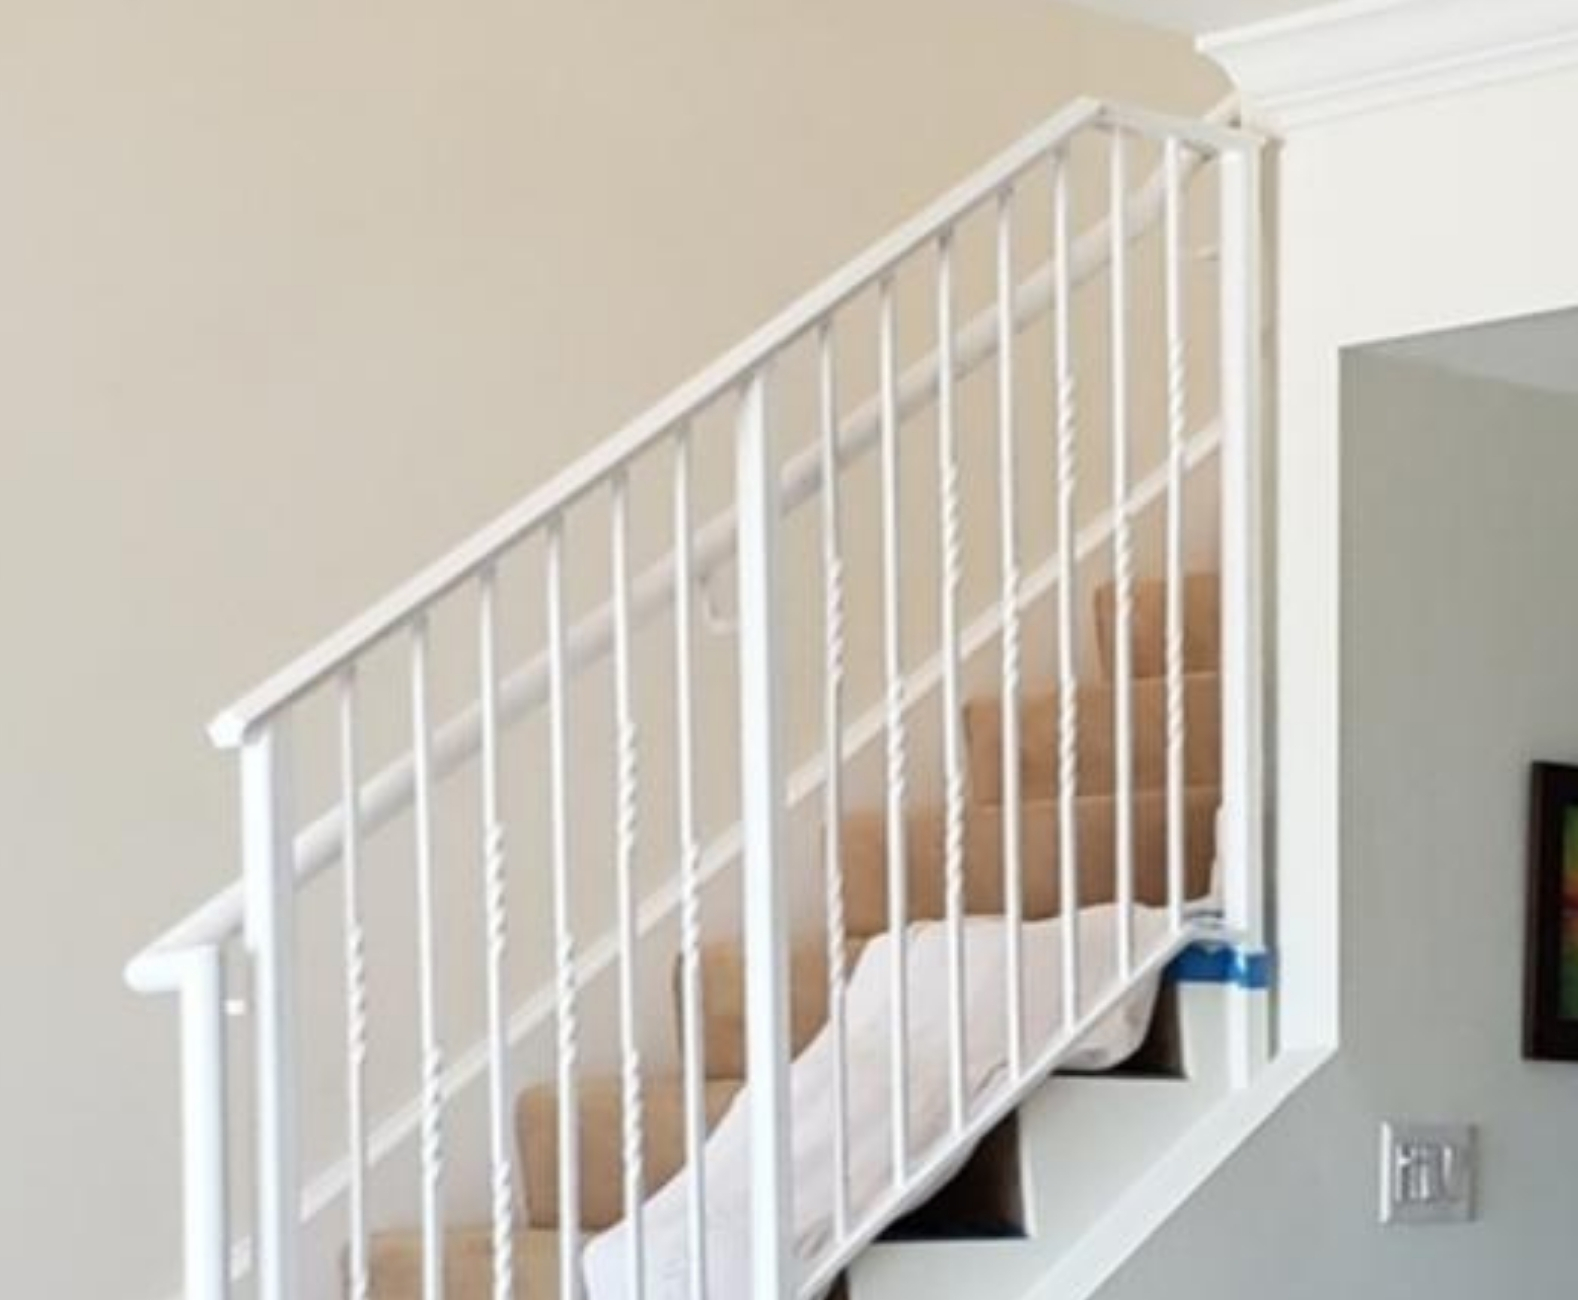 David's Refinished Stair Railing